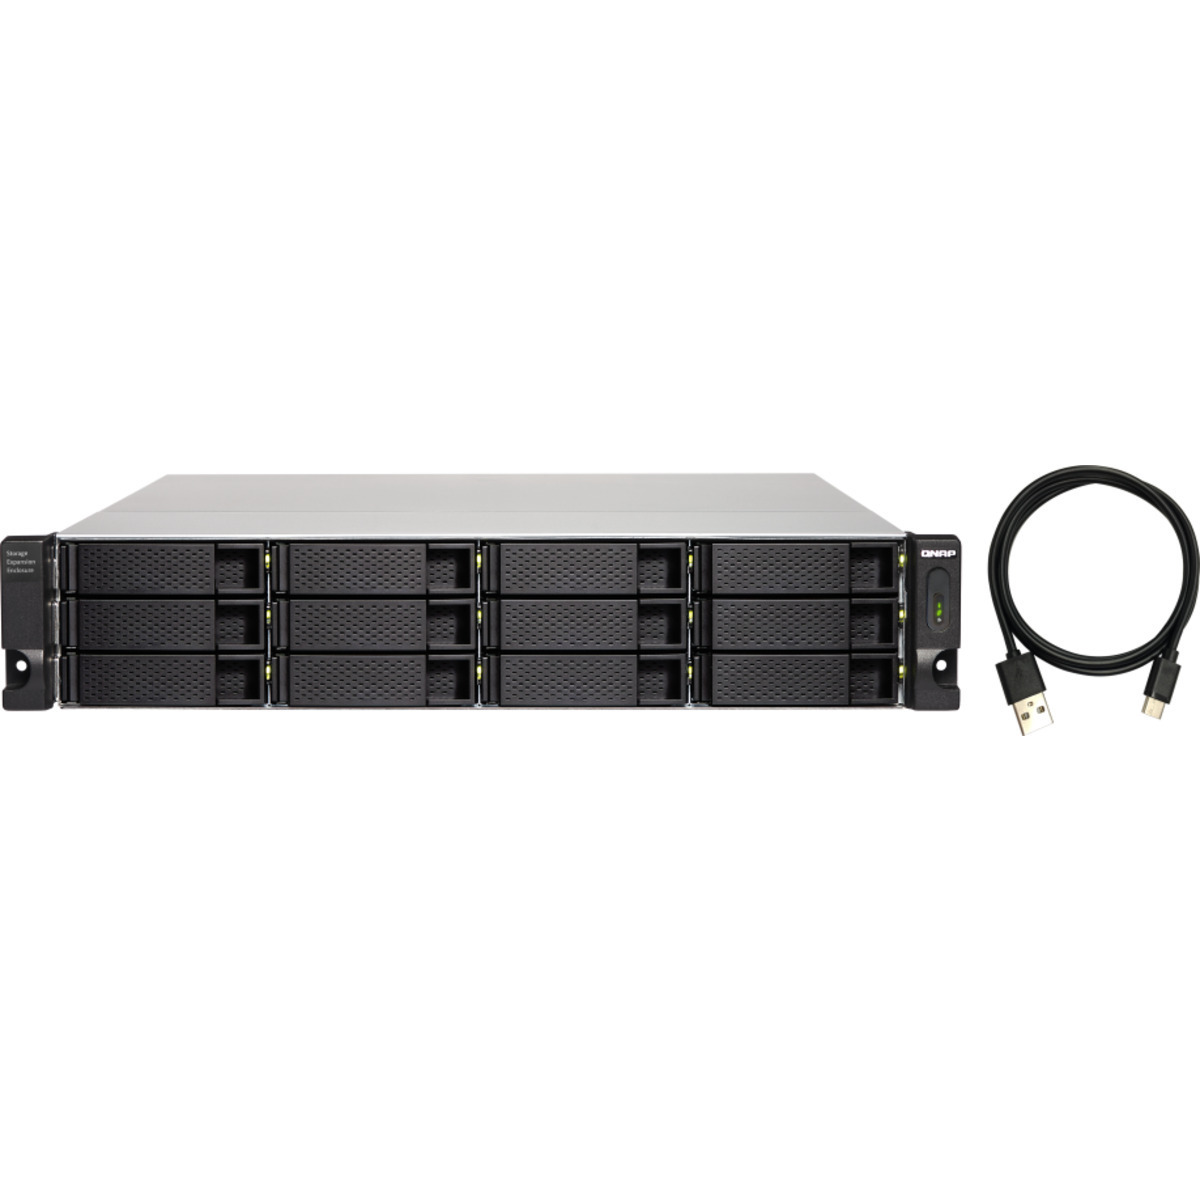 QNAP TL-R1200C-RP External Expansion Drive 168tb 12-Bay RackMount Multimedia / Power User / Business Expansion Enclosure 7x24tb Western Digital Red Pro WD240KFGX 3.5 7200rpm SATA 6Gb/s HDD NAS Class Drives Installed - Burn-In Tested TL-R1200C-RP External Expansion Drive